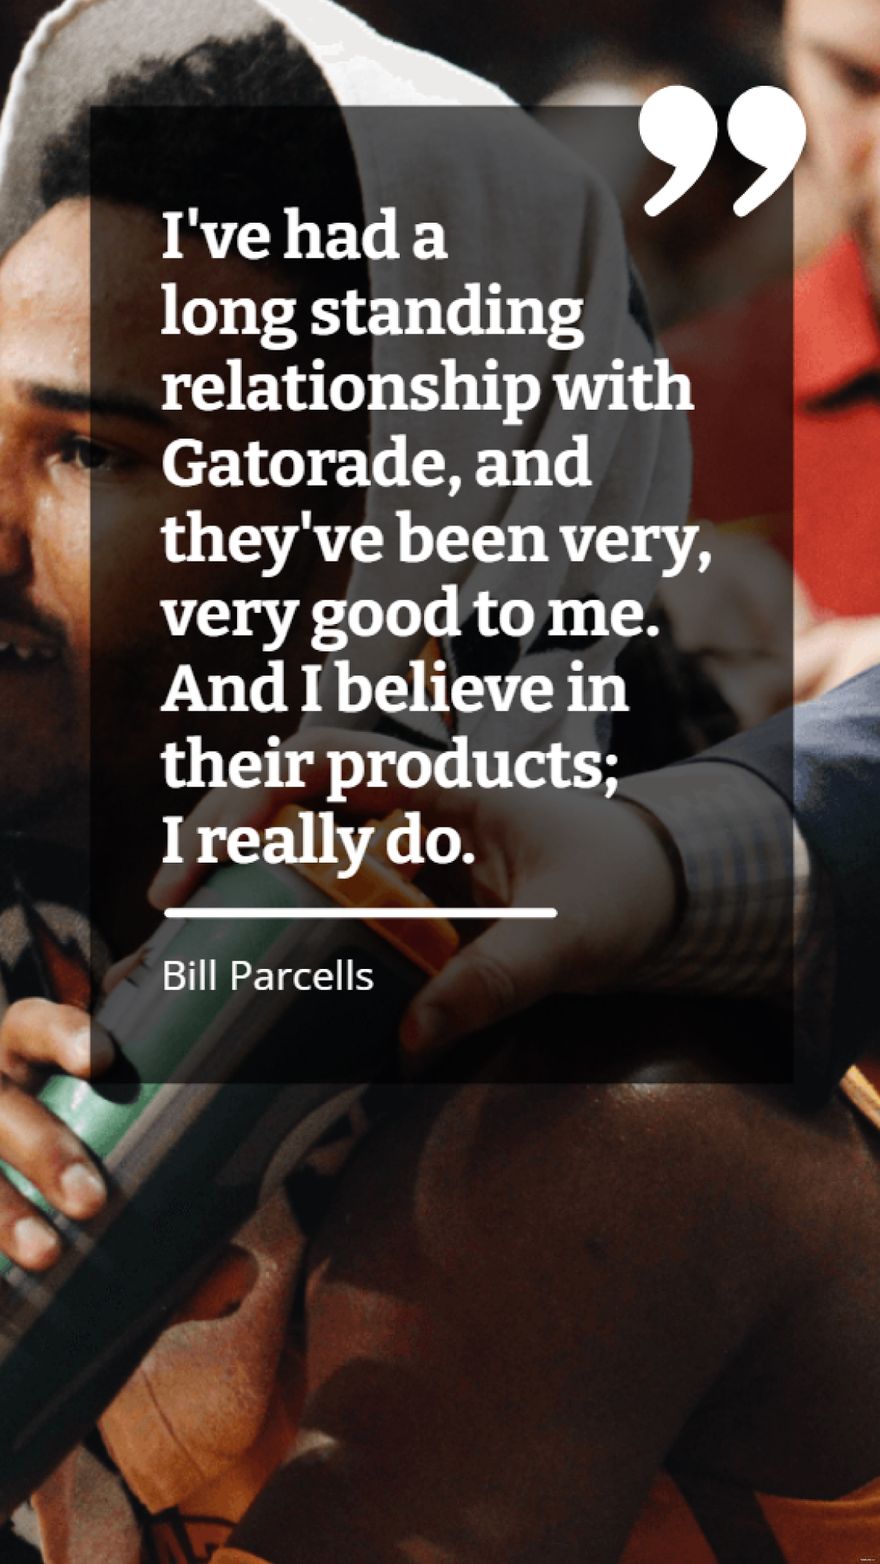 Bill Parcells - I've had a long standing relationship with Gatorade, and they've been very, very good to me. And I believe in their products; I really do.